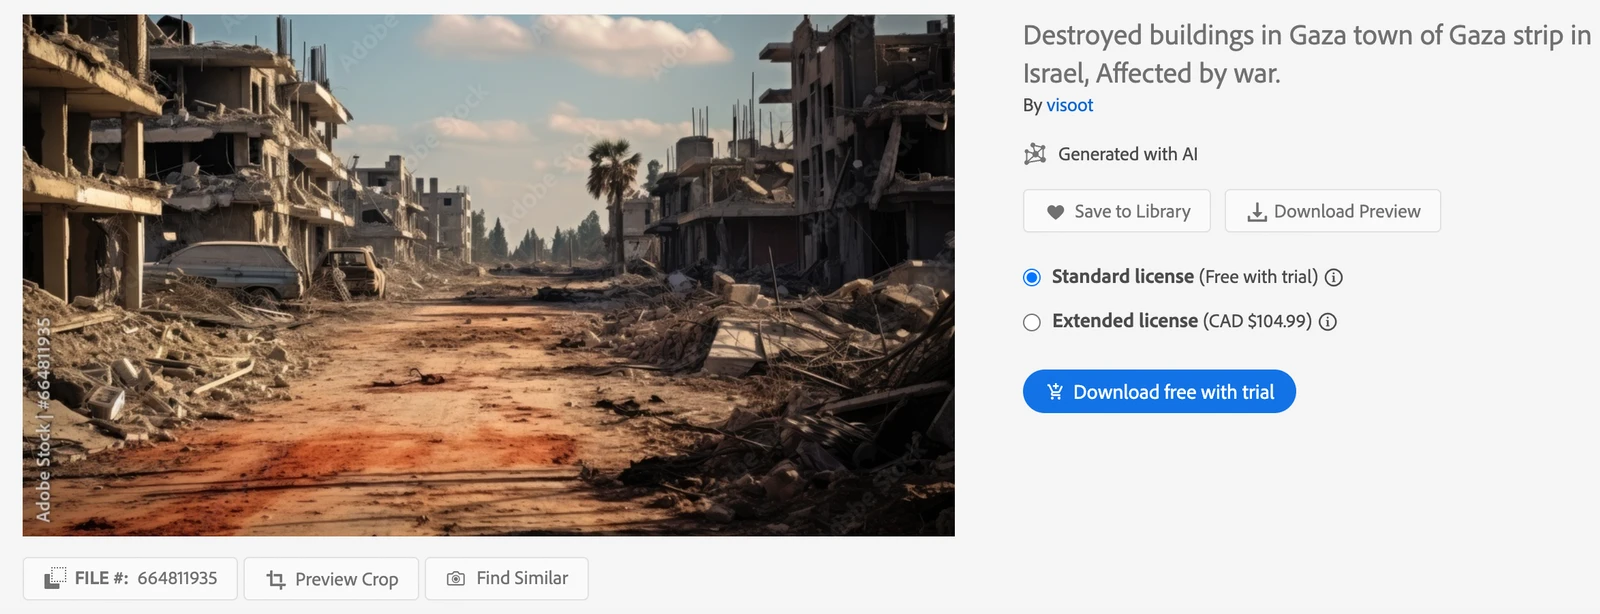 Screenshot of Adobe stock images site with AI-generated image titled "Destroyed buildings in Gaza town of Gaza strip in Israel, Affected by war."